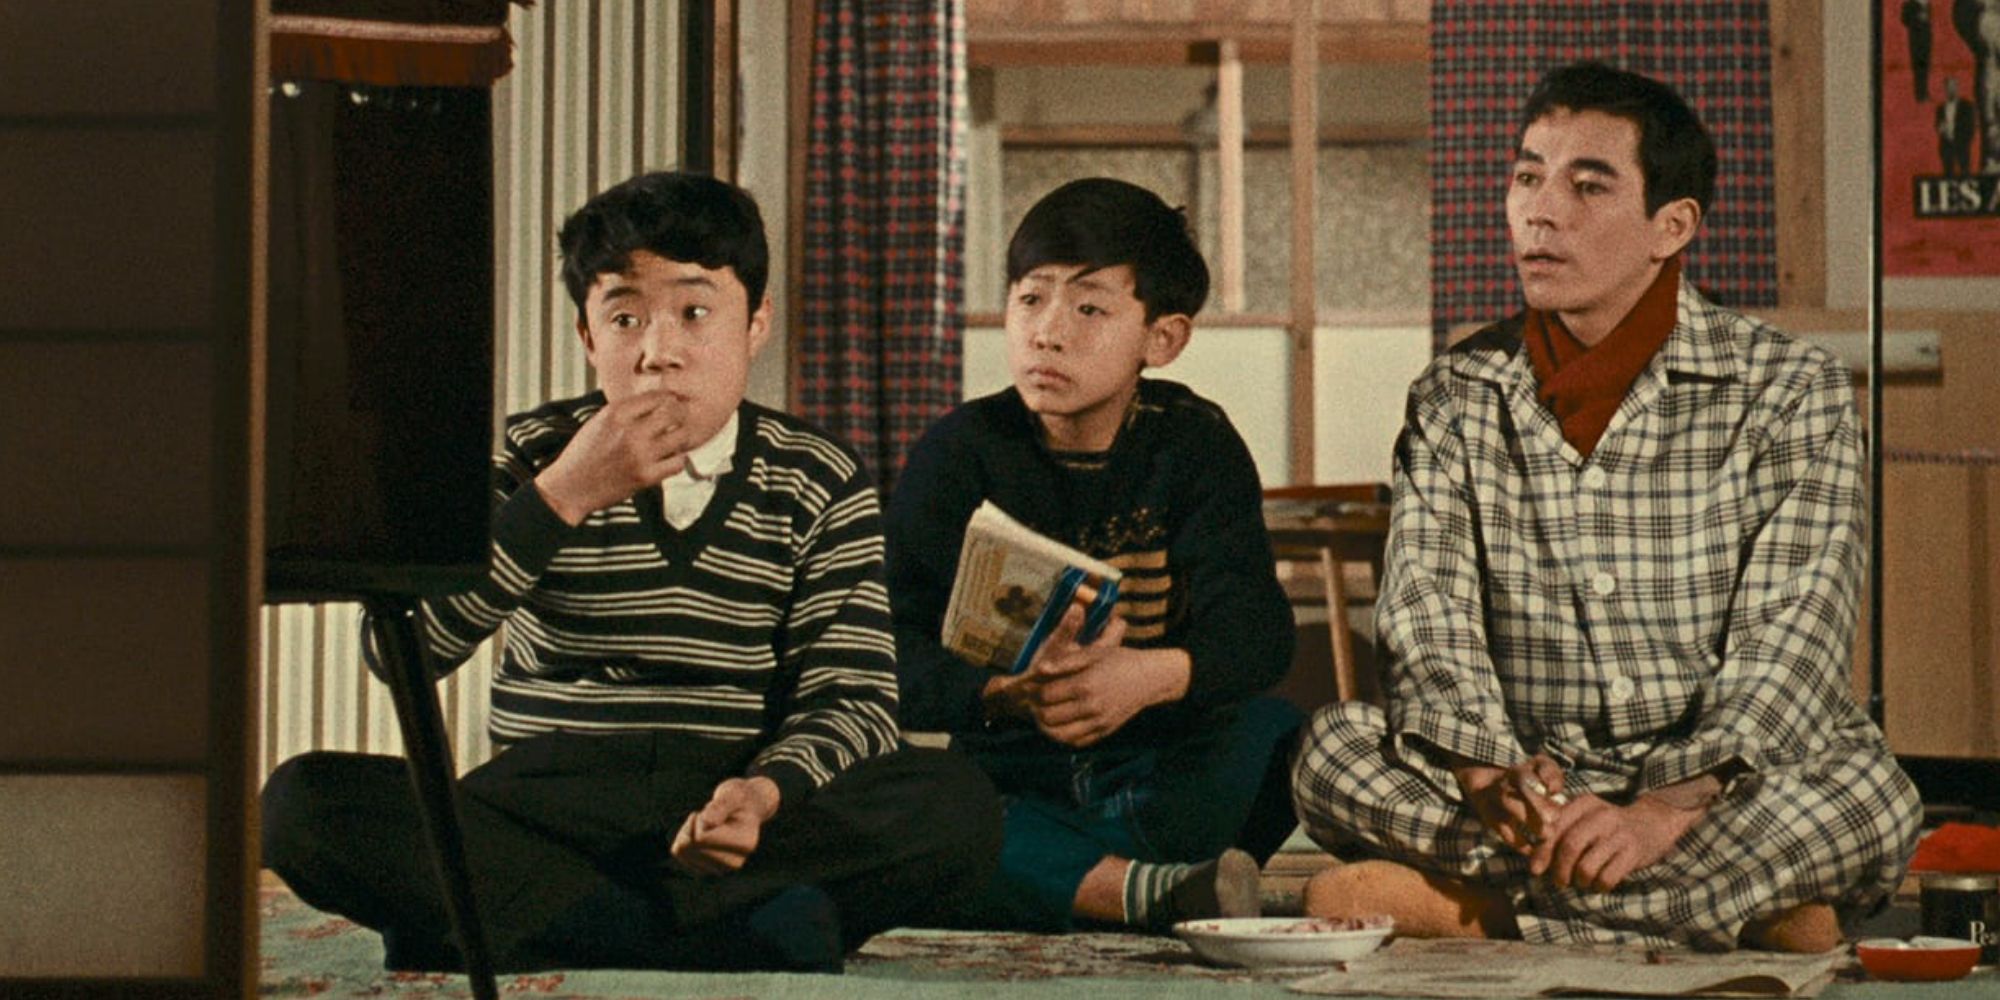 Three young boys sit in front of a TV in Good Morning 